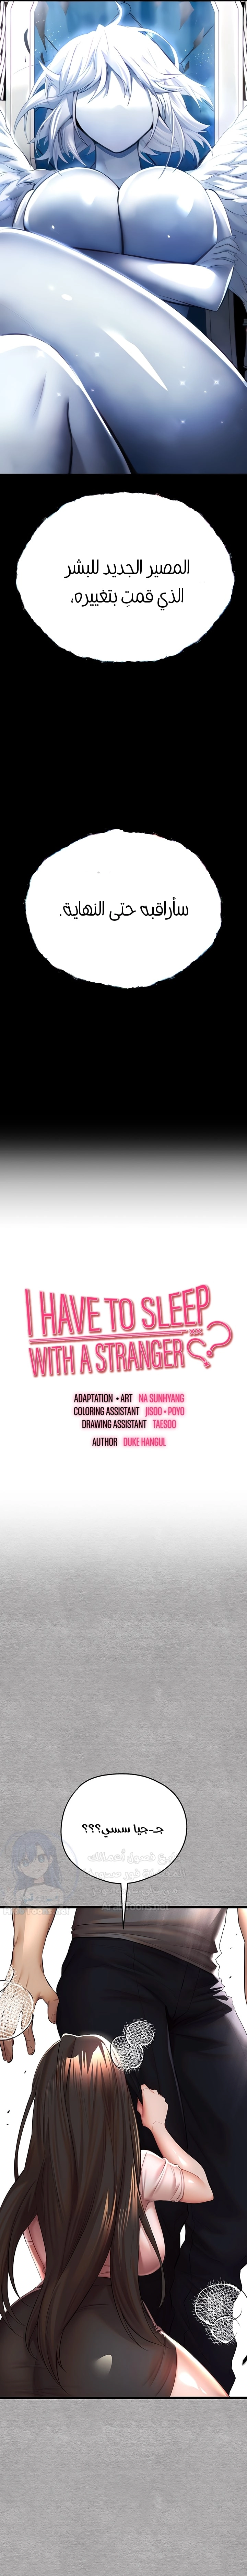 I Have To Sleep With A Stranger? - 26 - 65746cb73f592.webp